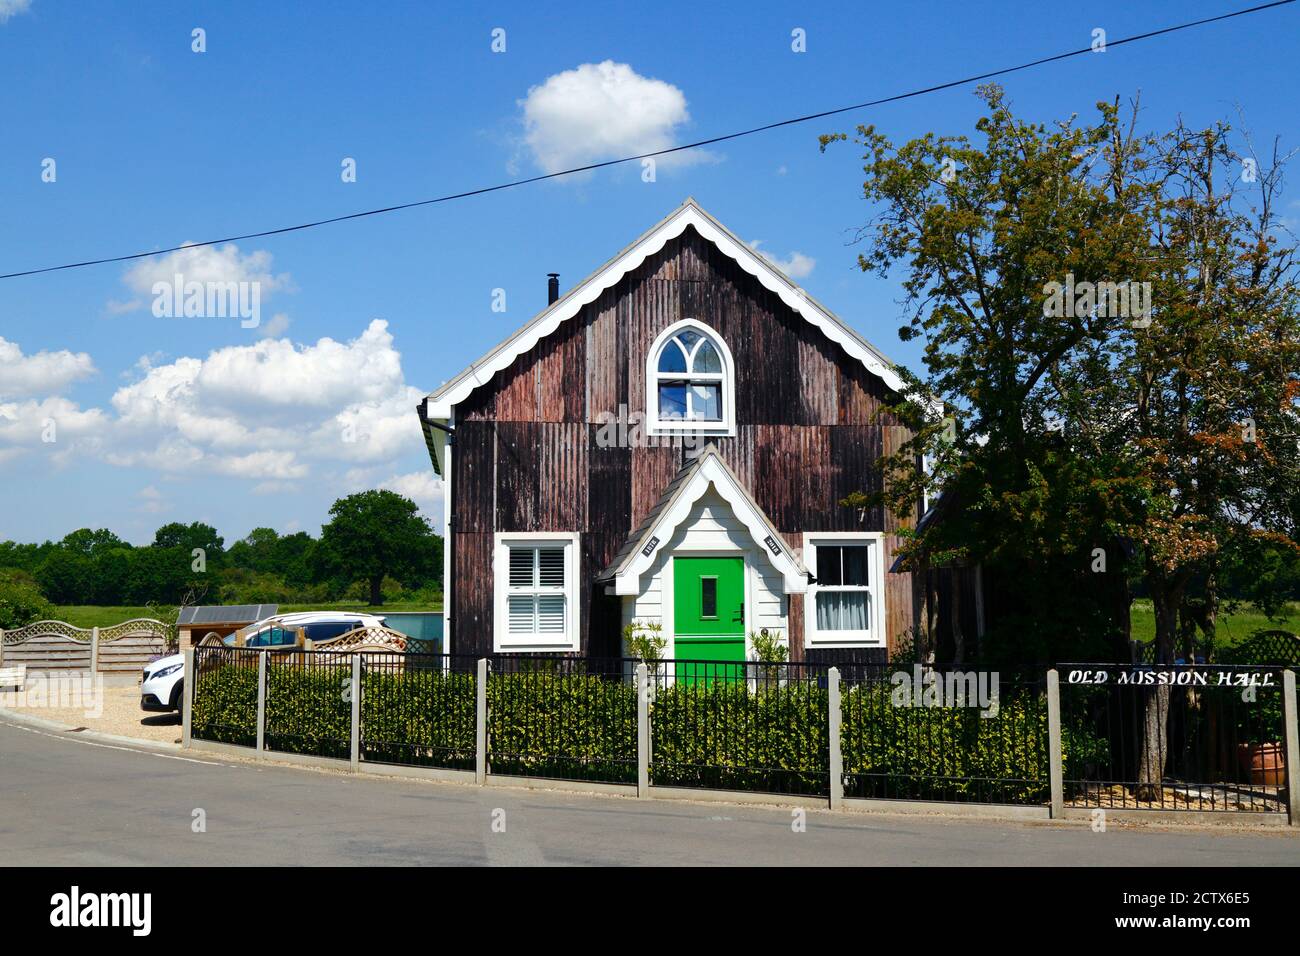 Former Old Mission Hall church building, now a house, Lower Haysden, Kent, England Stock Photo